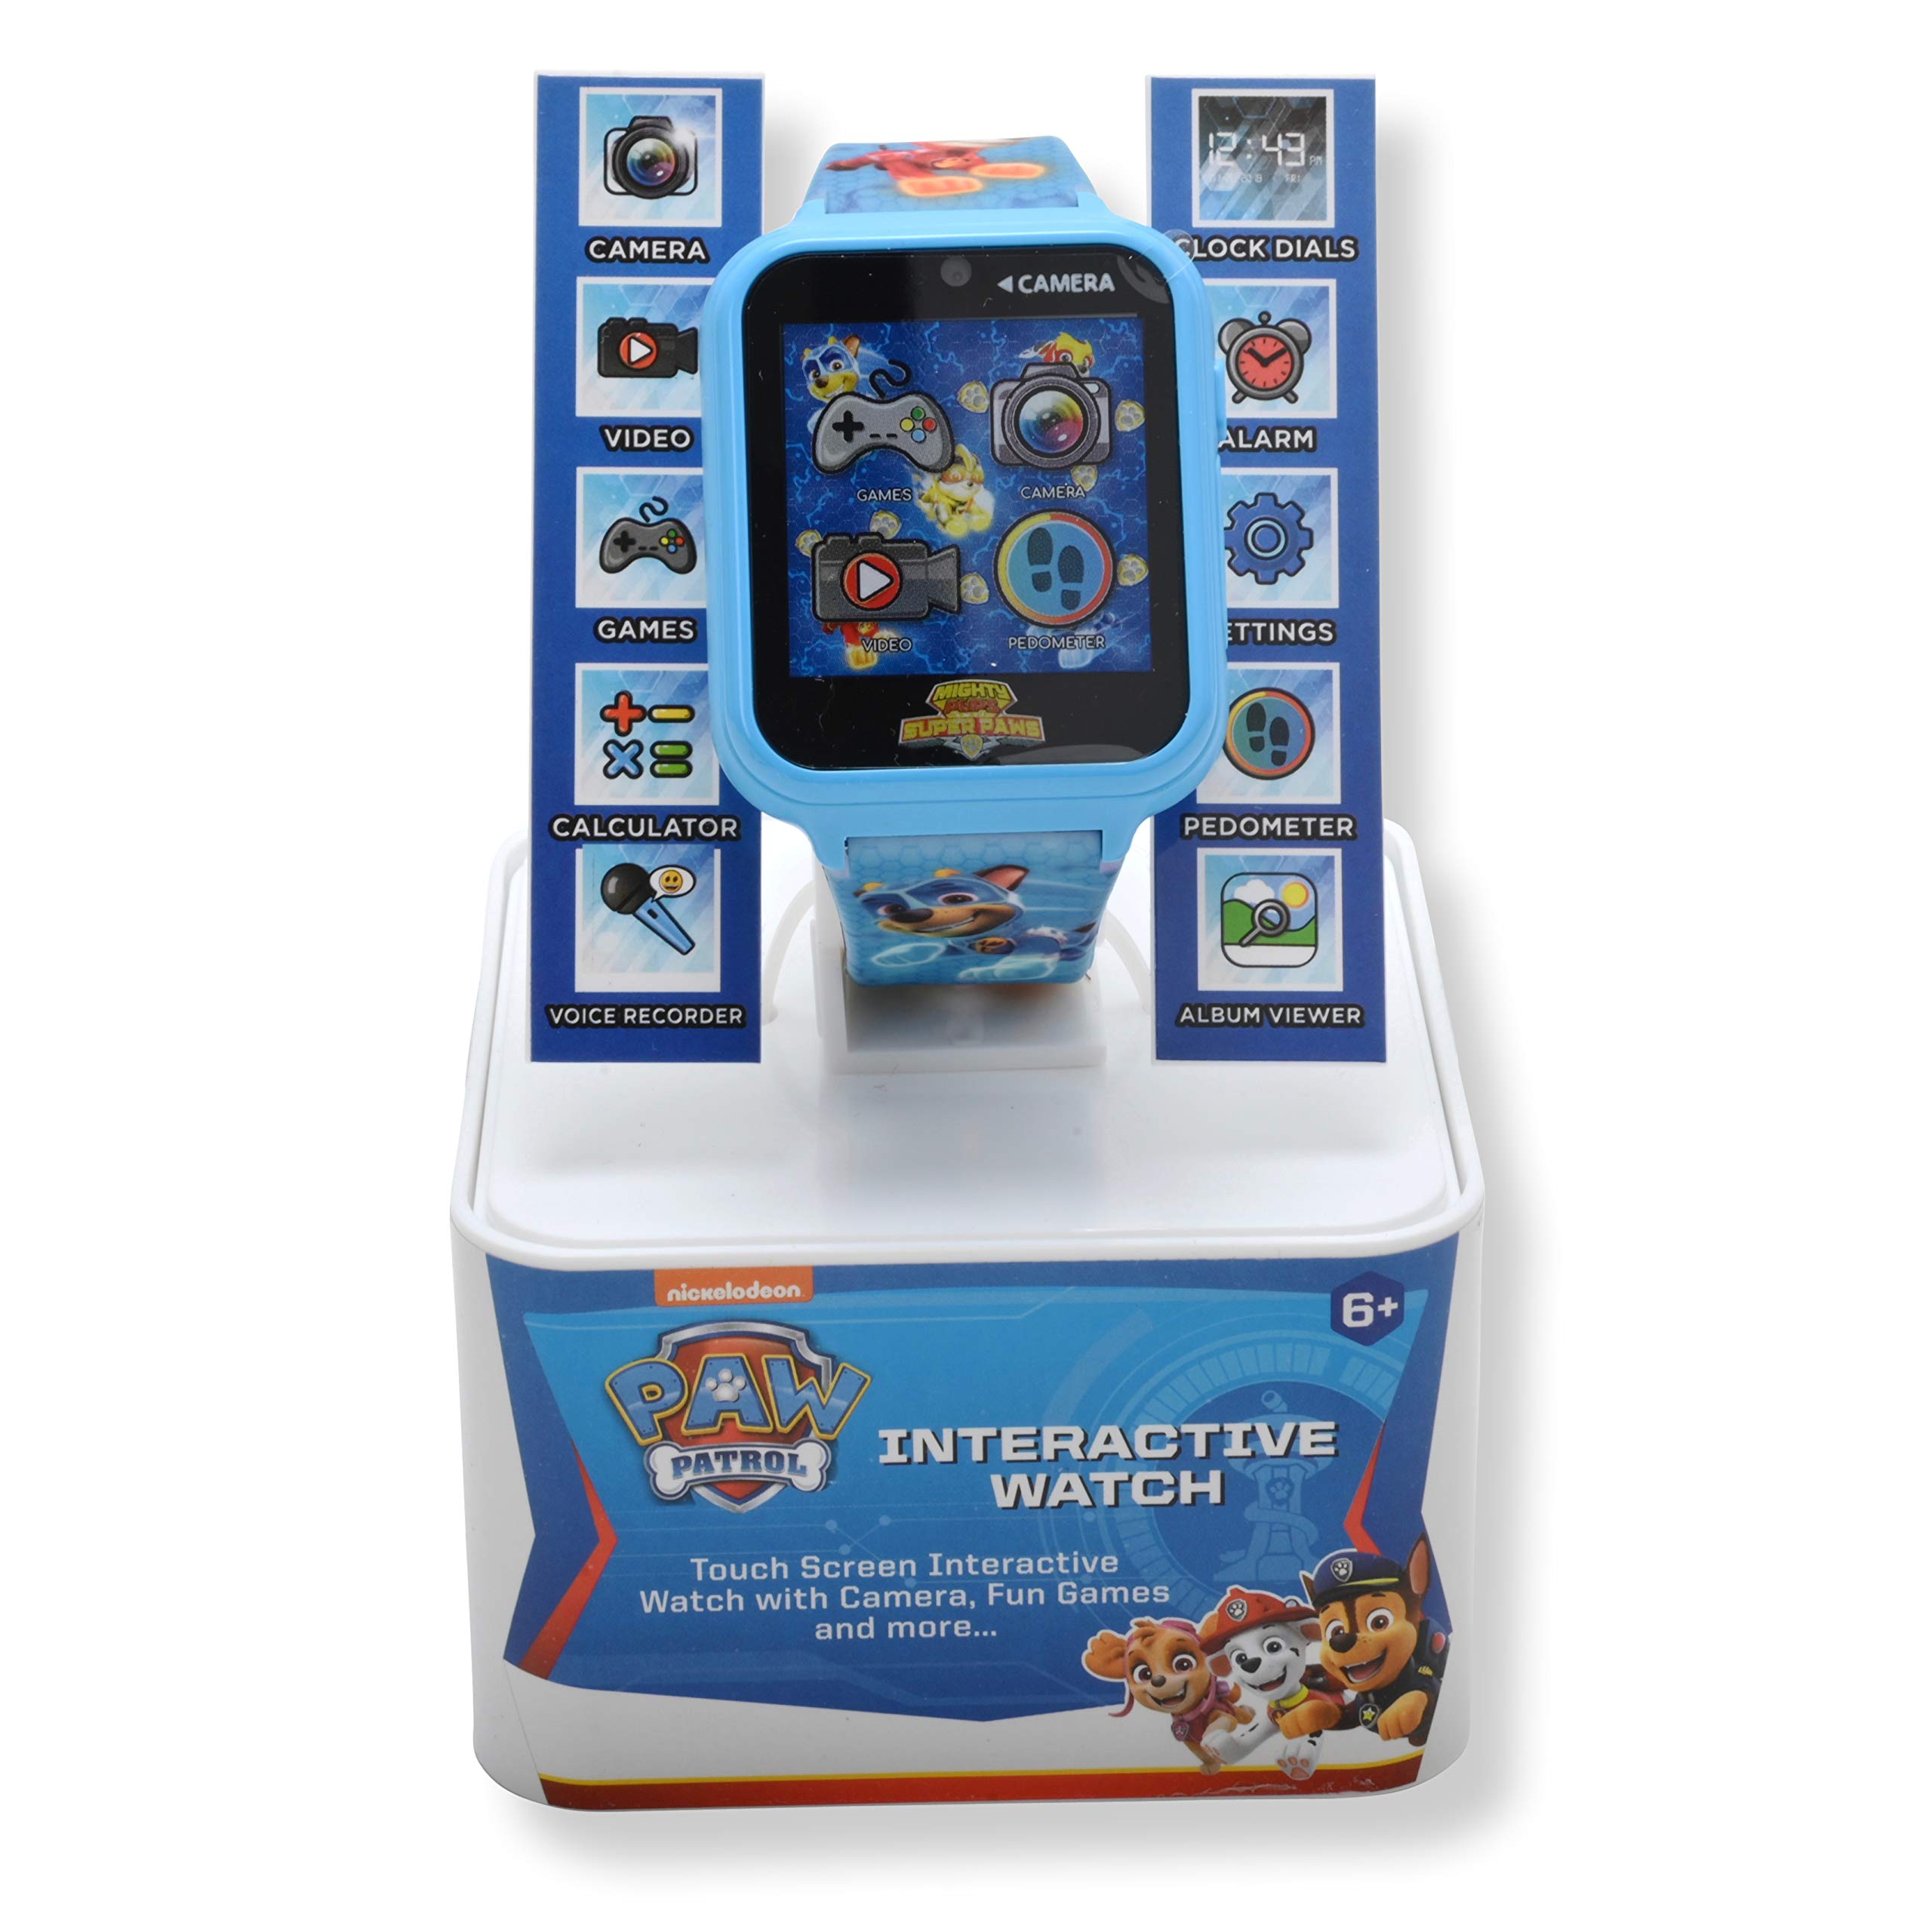 Accutime Paw Patrol Smart Watch with Camera for Kids and Toddlers - Interactive Smartwatch for Boys & Girls Featuring Games, Voice Recorder, Calculator, Pedometer, Alarm, Stopwatch, with USB Cable